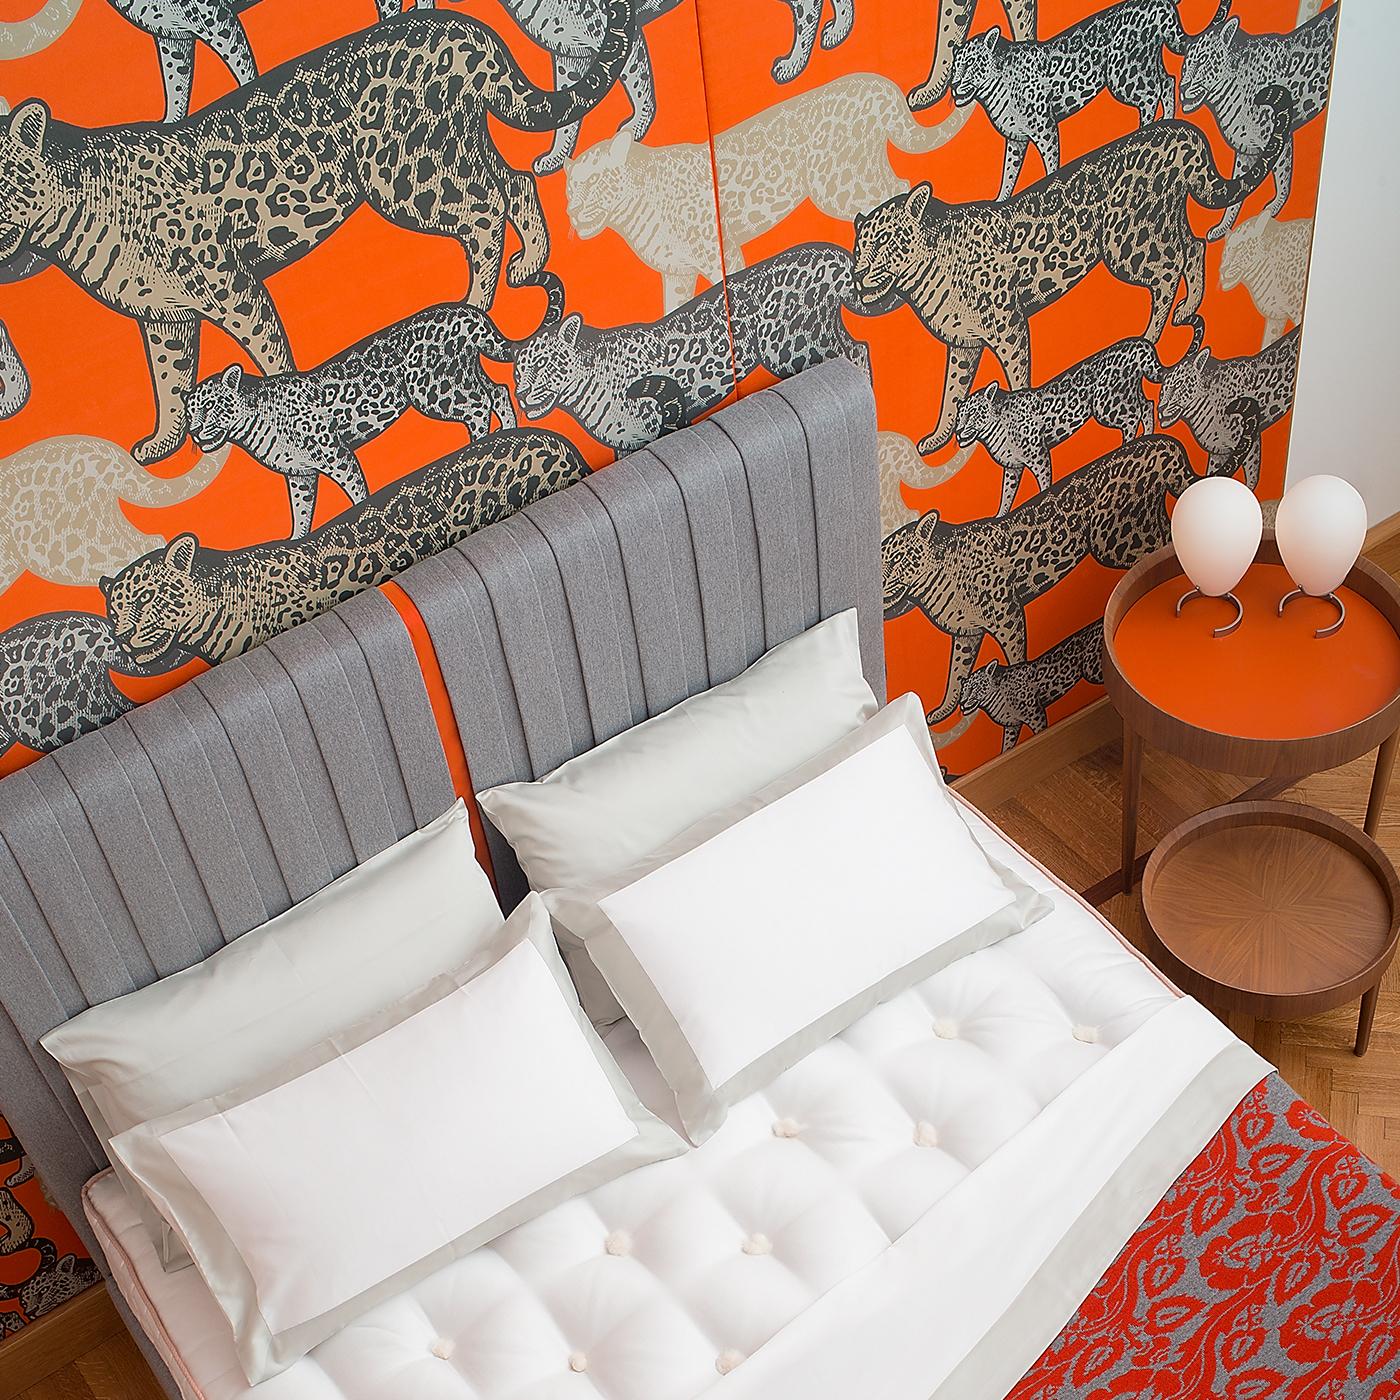 This stunning wall covering is part of the Walking Leopards Collection in five different versions, distinctive for their bold color palette and eclectic design. A mesmerizing and visually impactful decoration for a modern home, this piece was